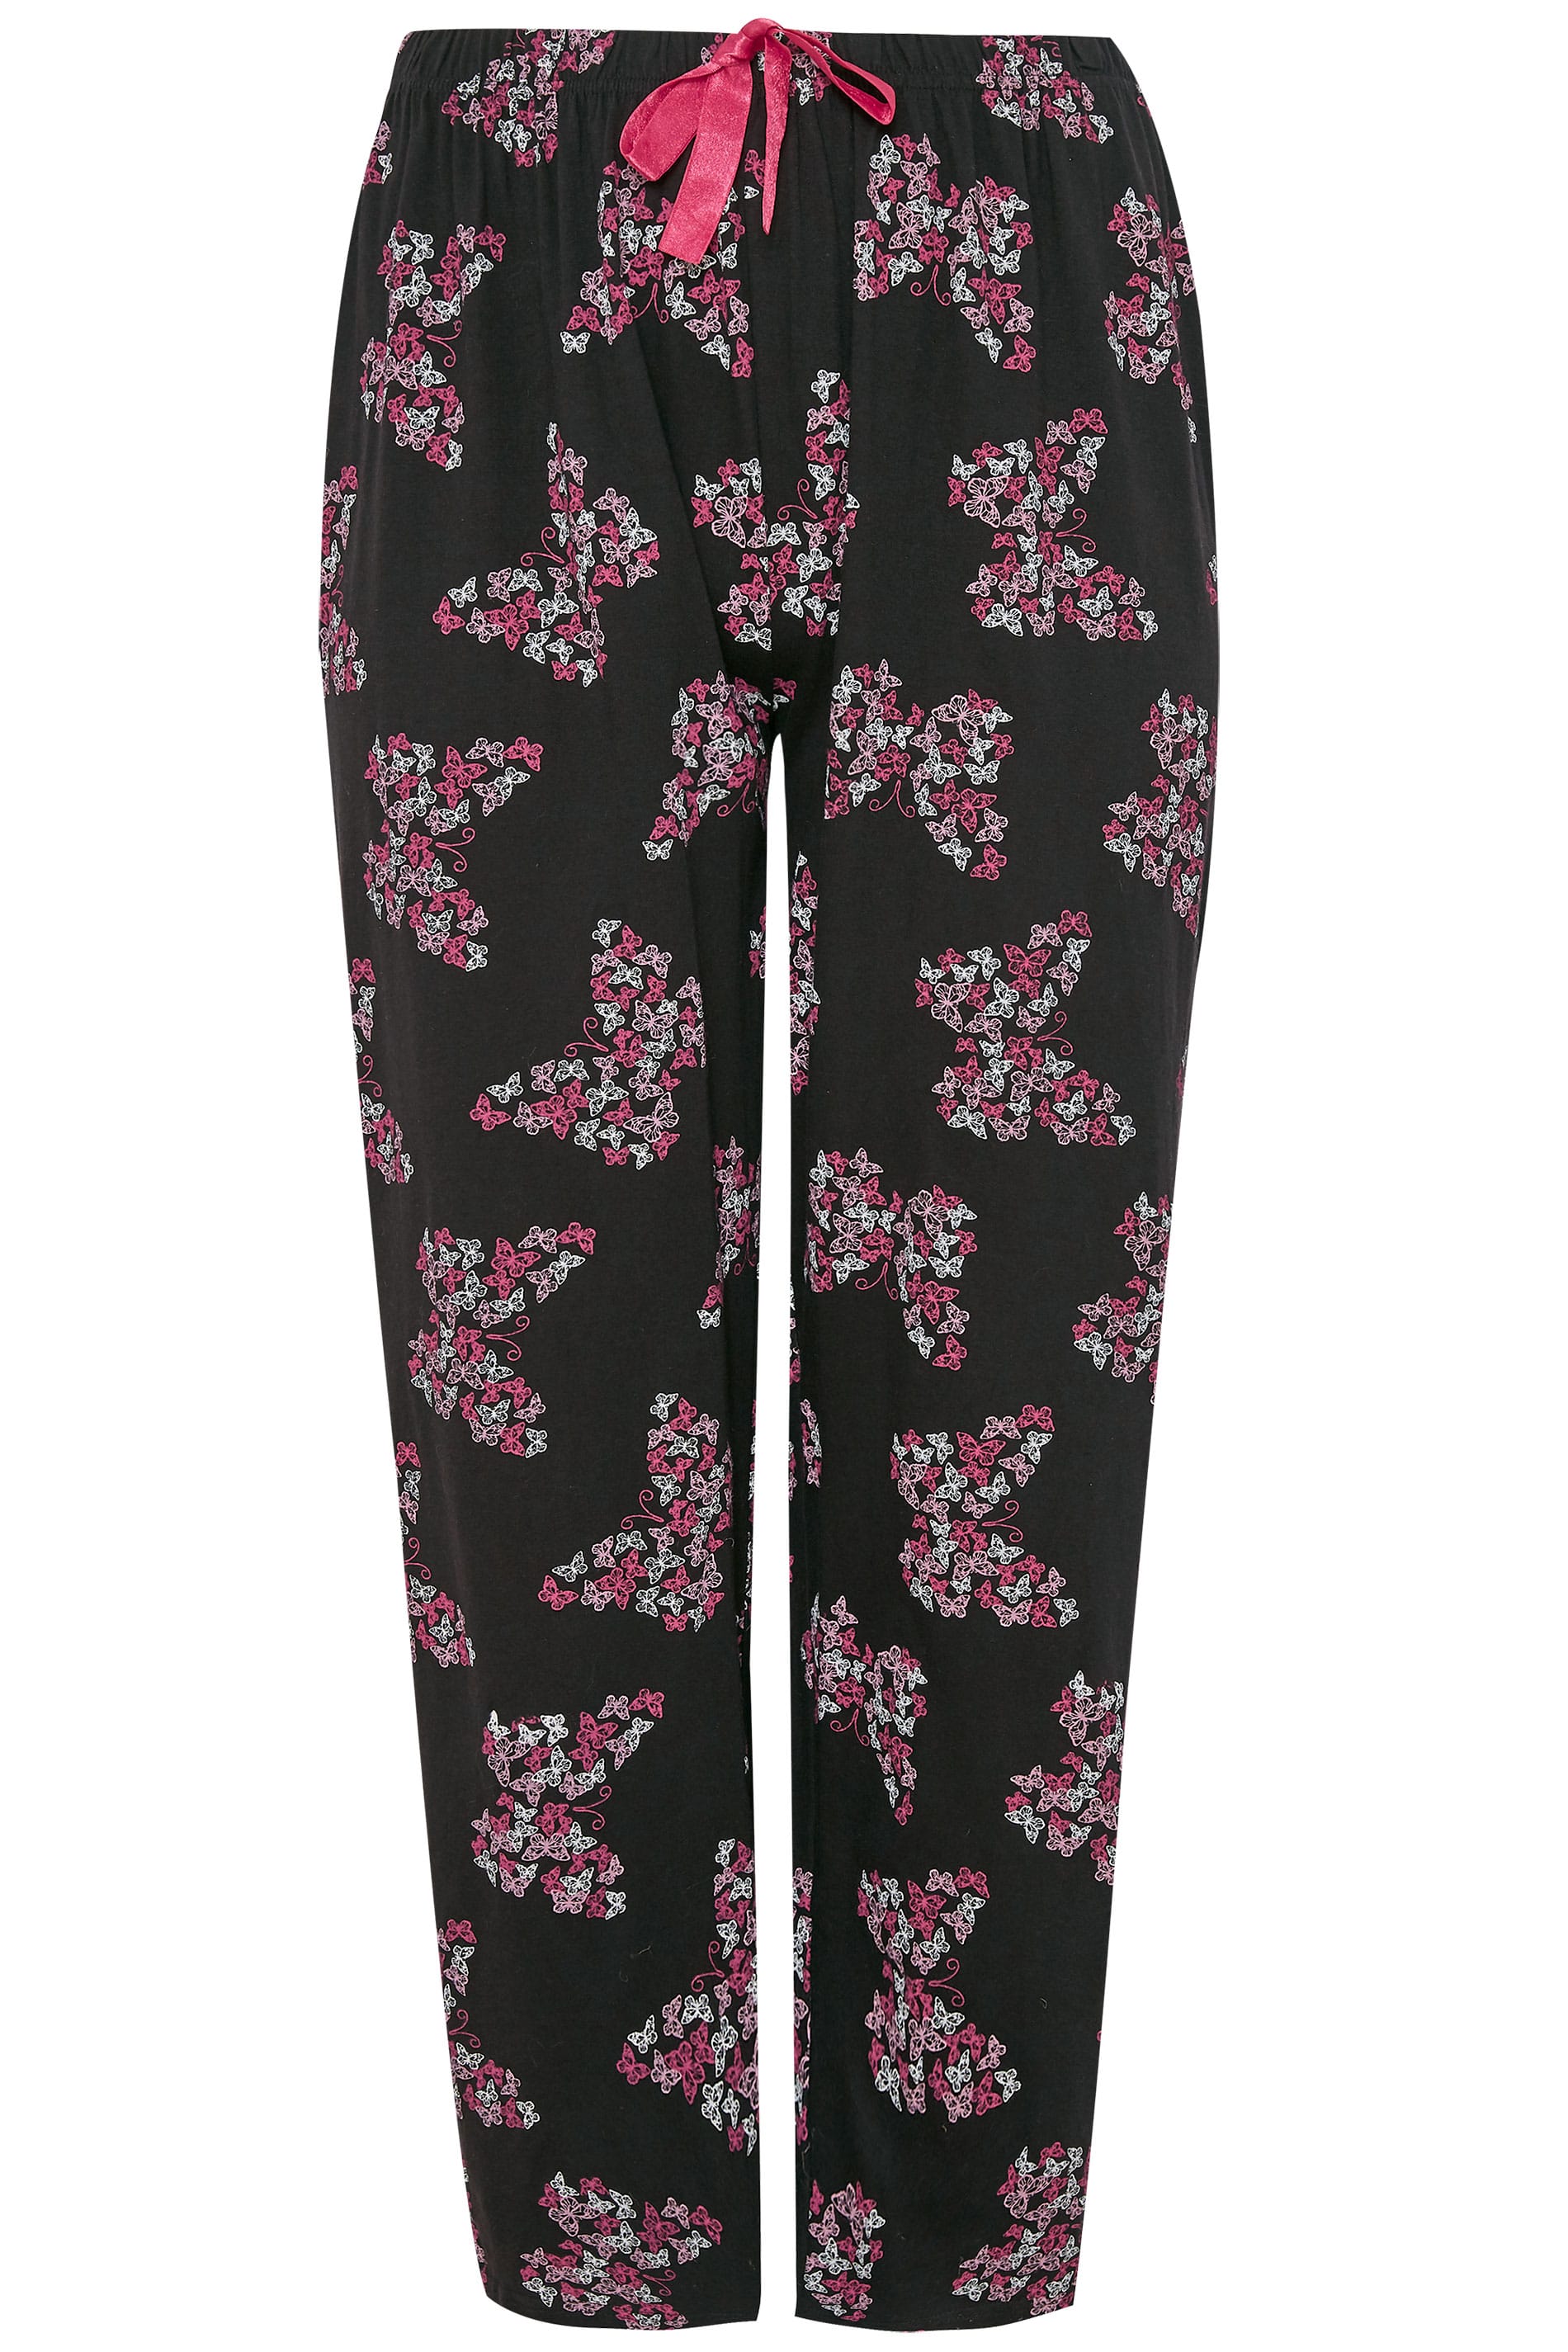 Plus Size Black Butterfly Pyjama Bottoms | Sizes 16 to 36 | Yours Clothing